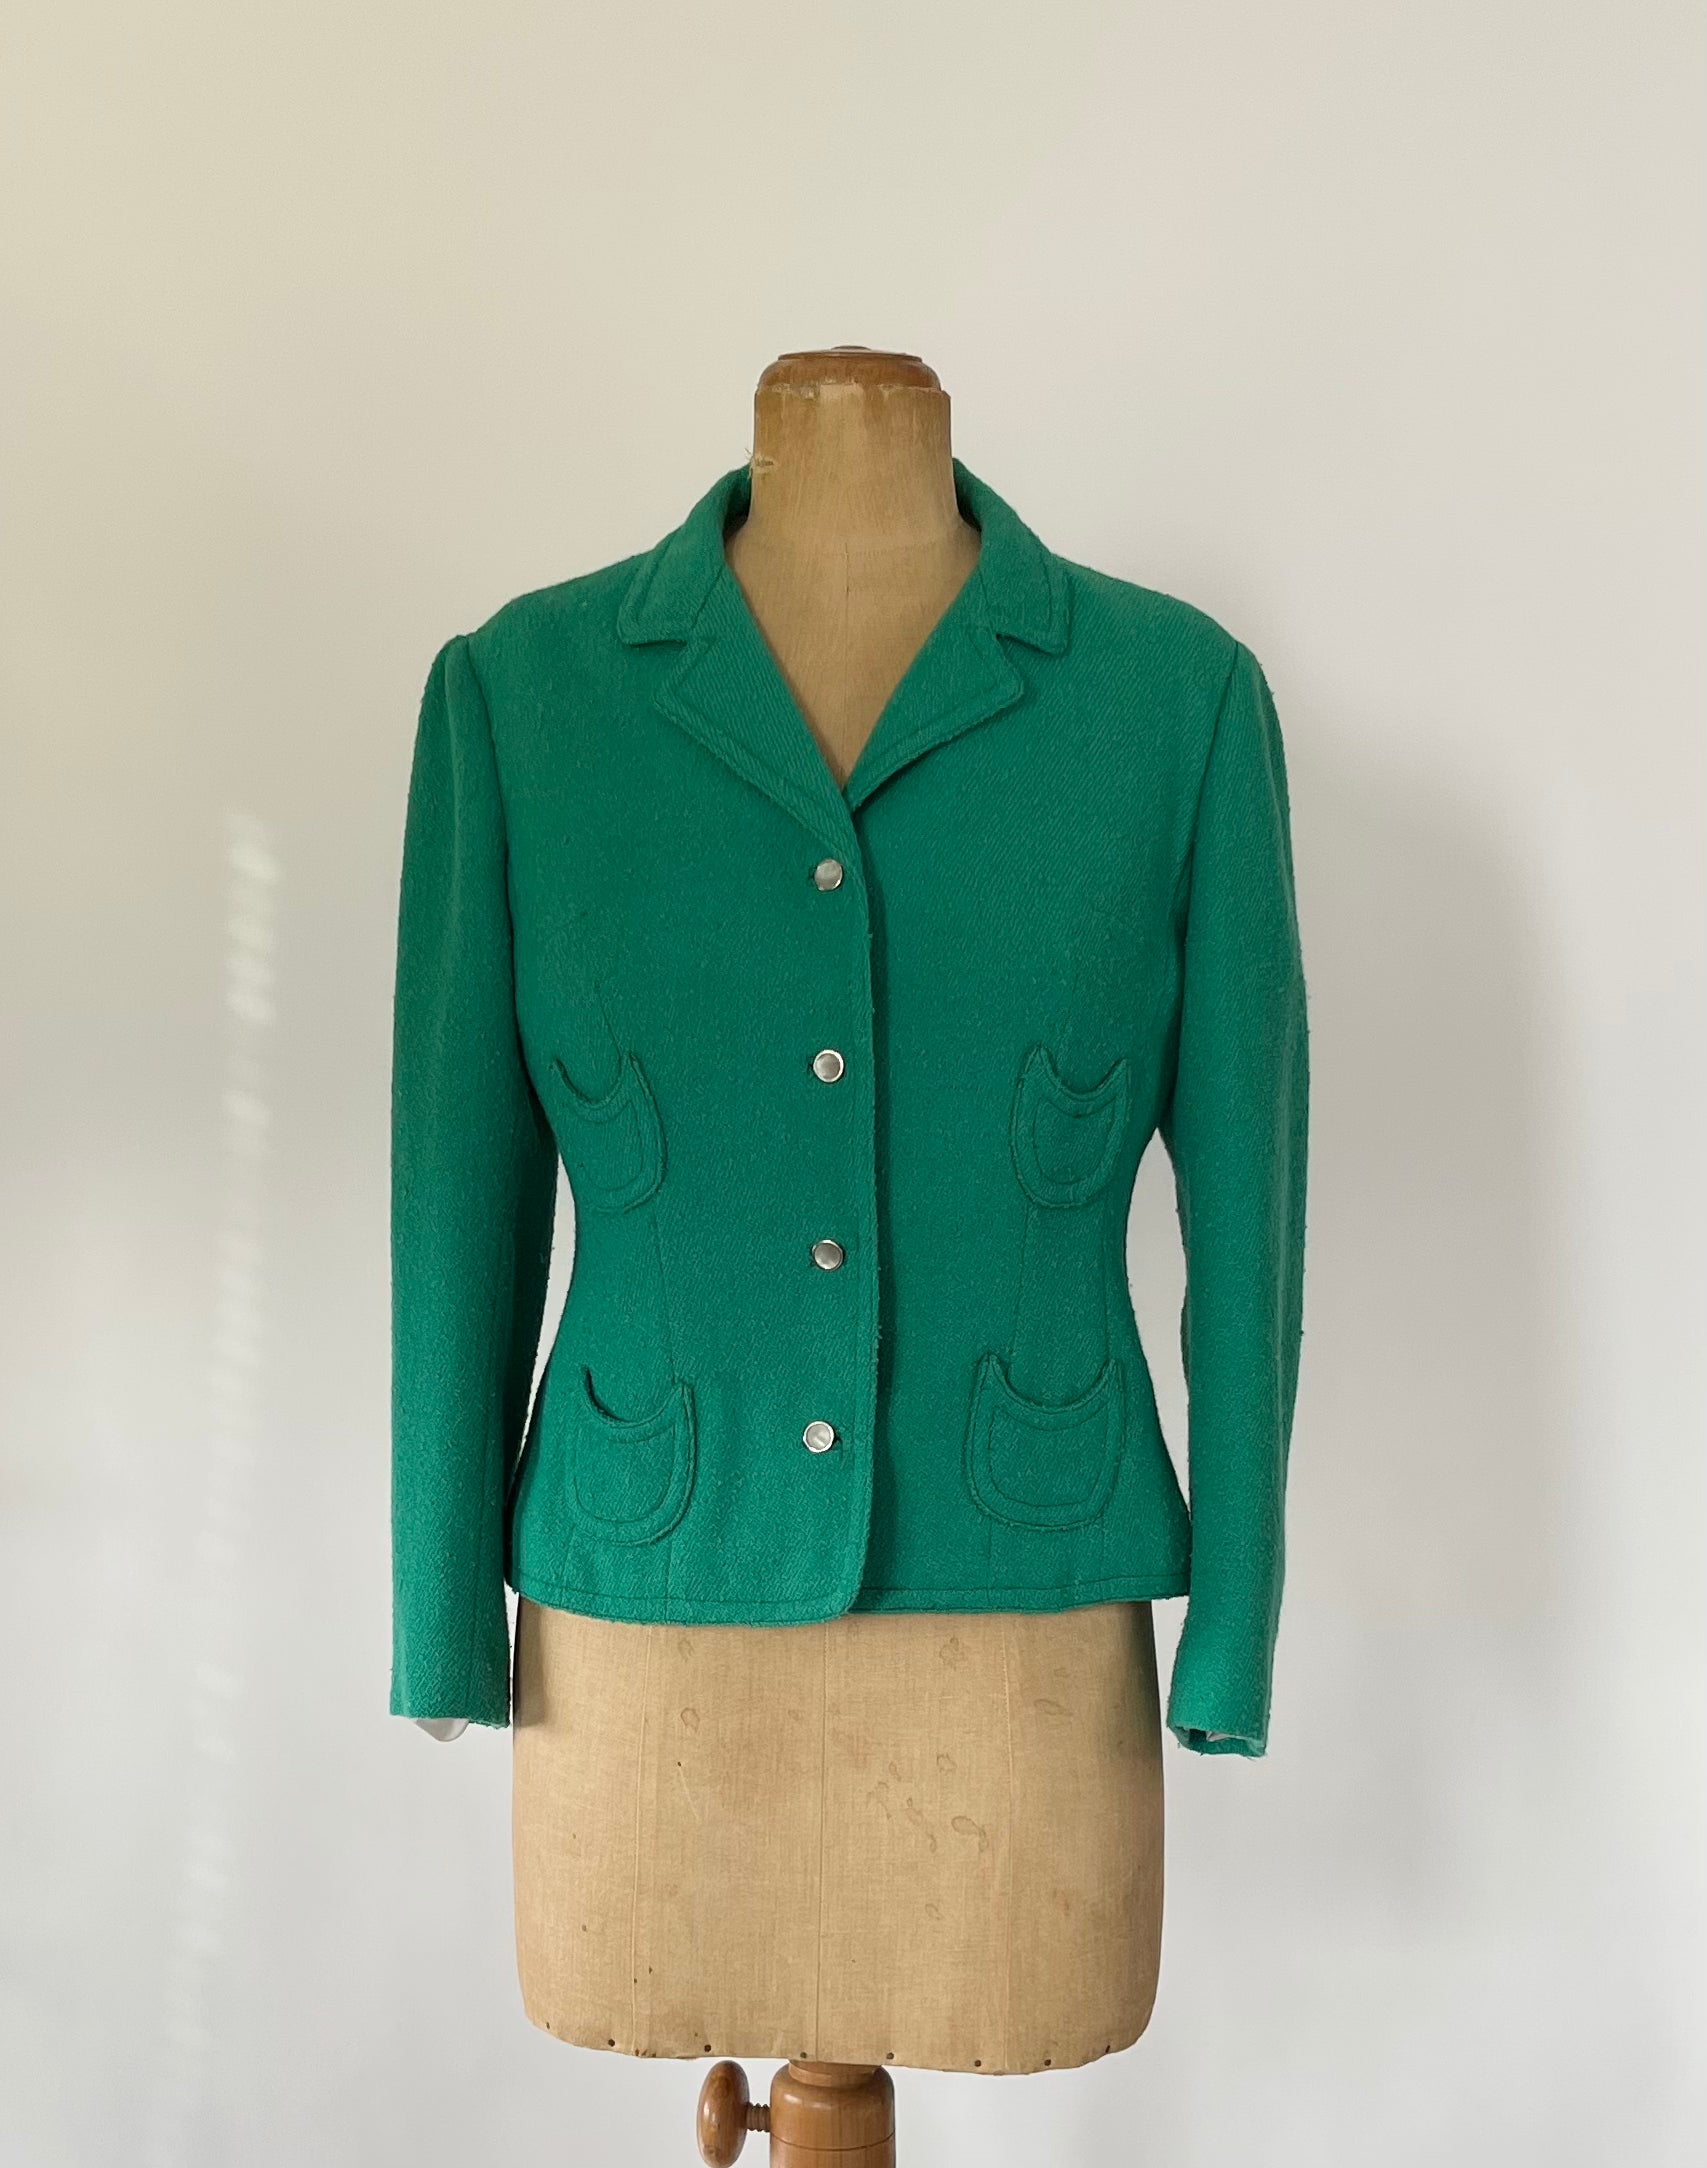 1960s Short Green Wool Blazer Made in France//Size M/L